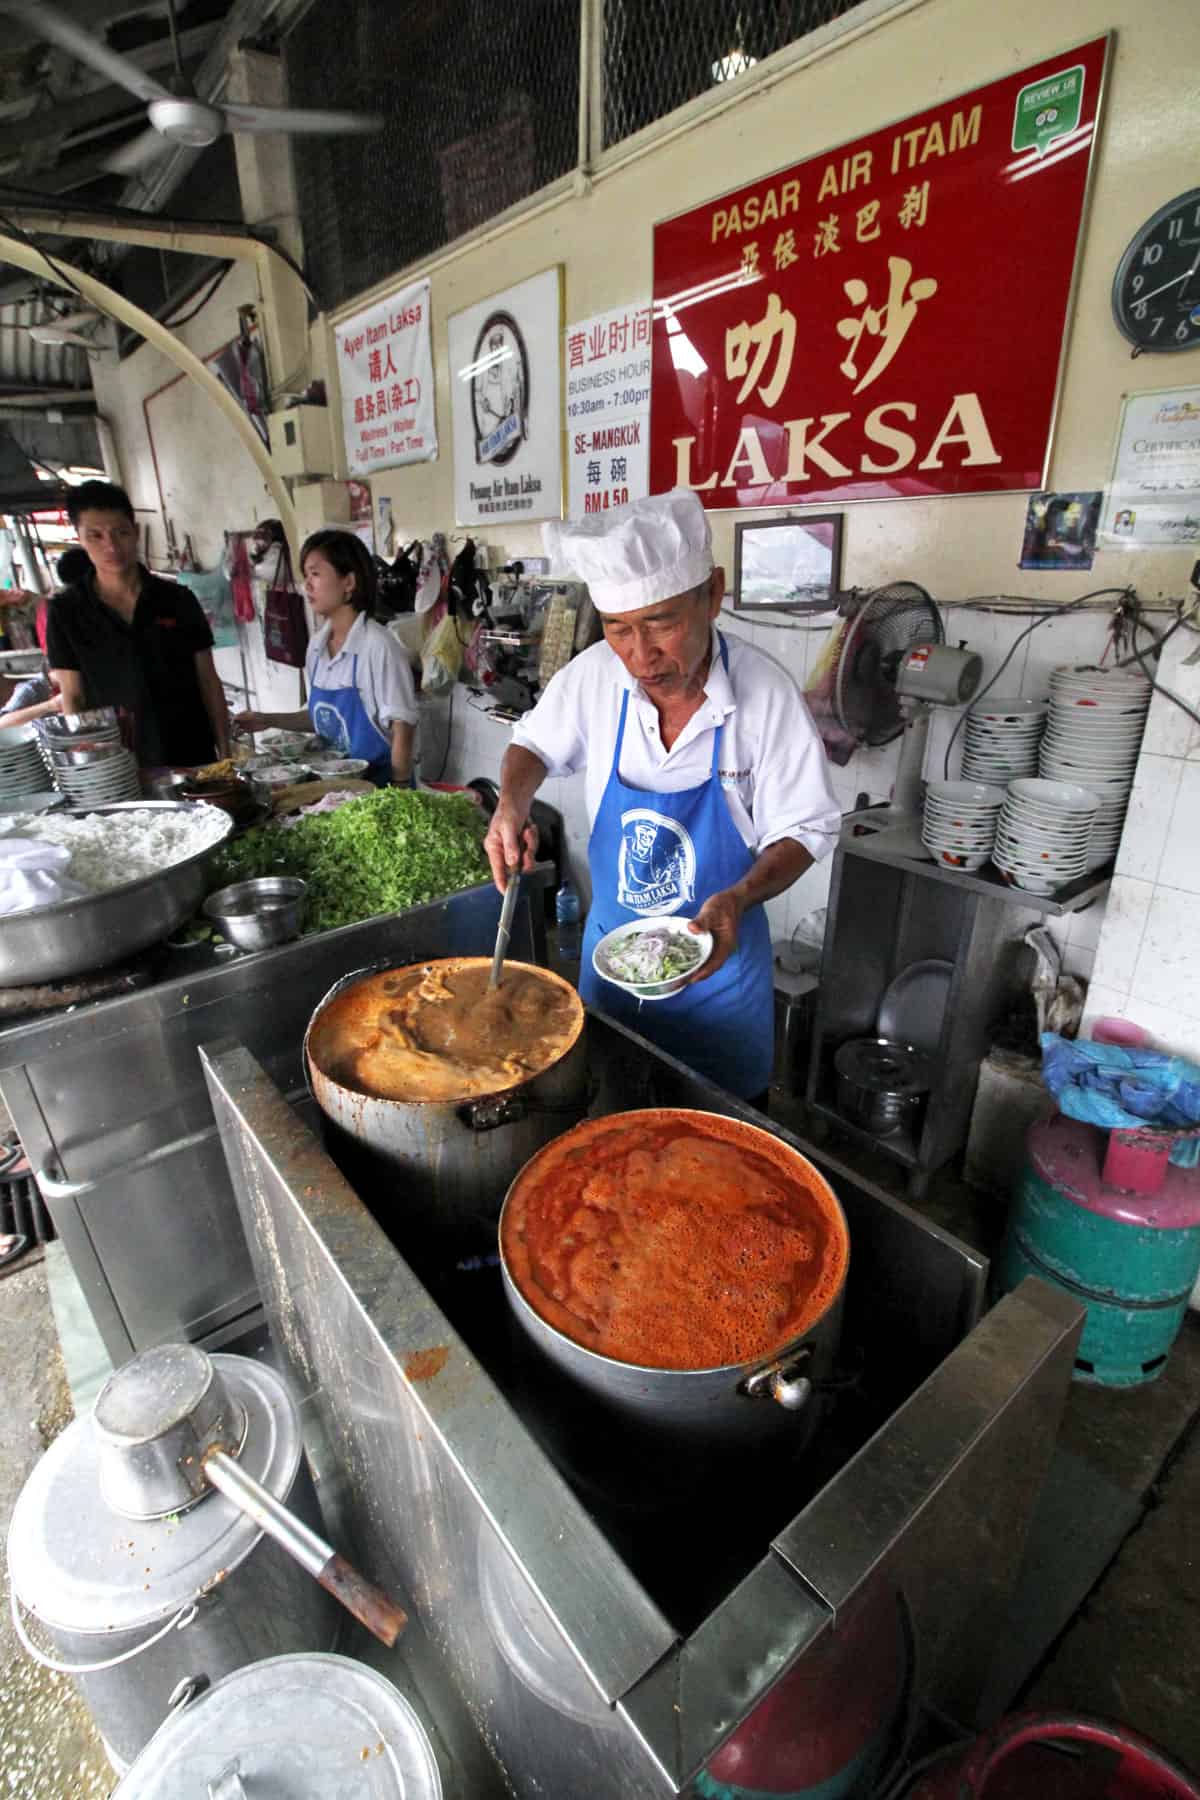 The 15 Best Penang Street Food Restaurants Will Fly For Food